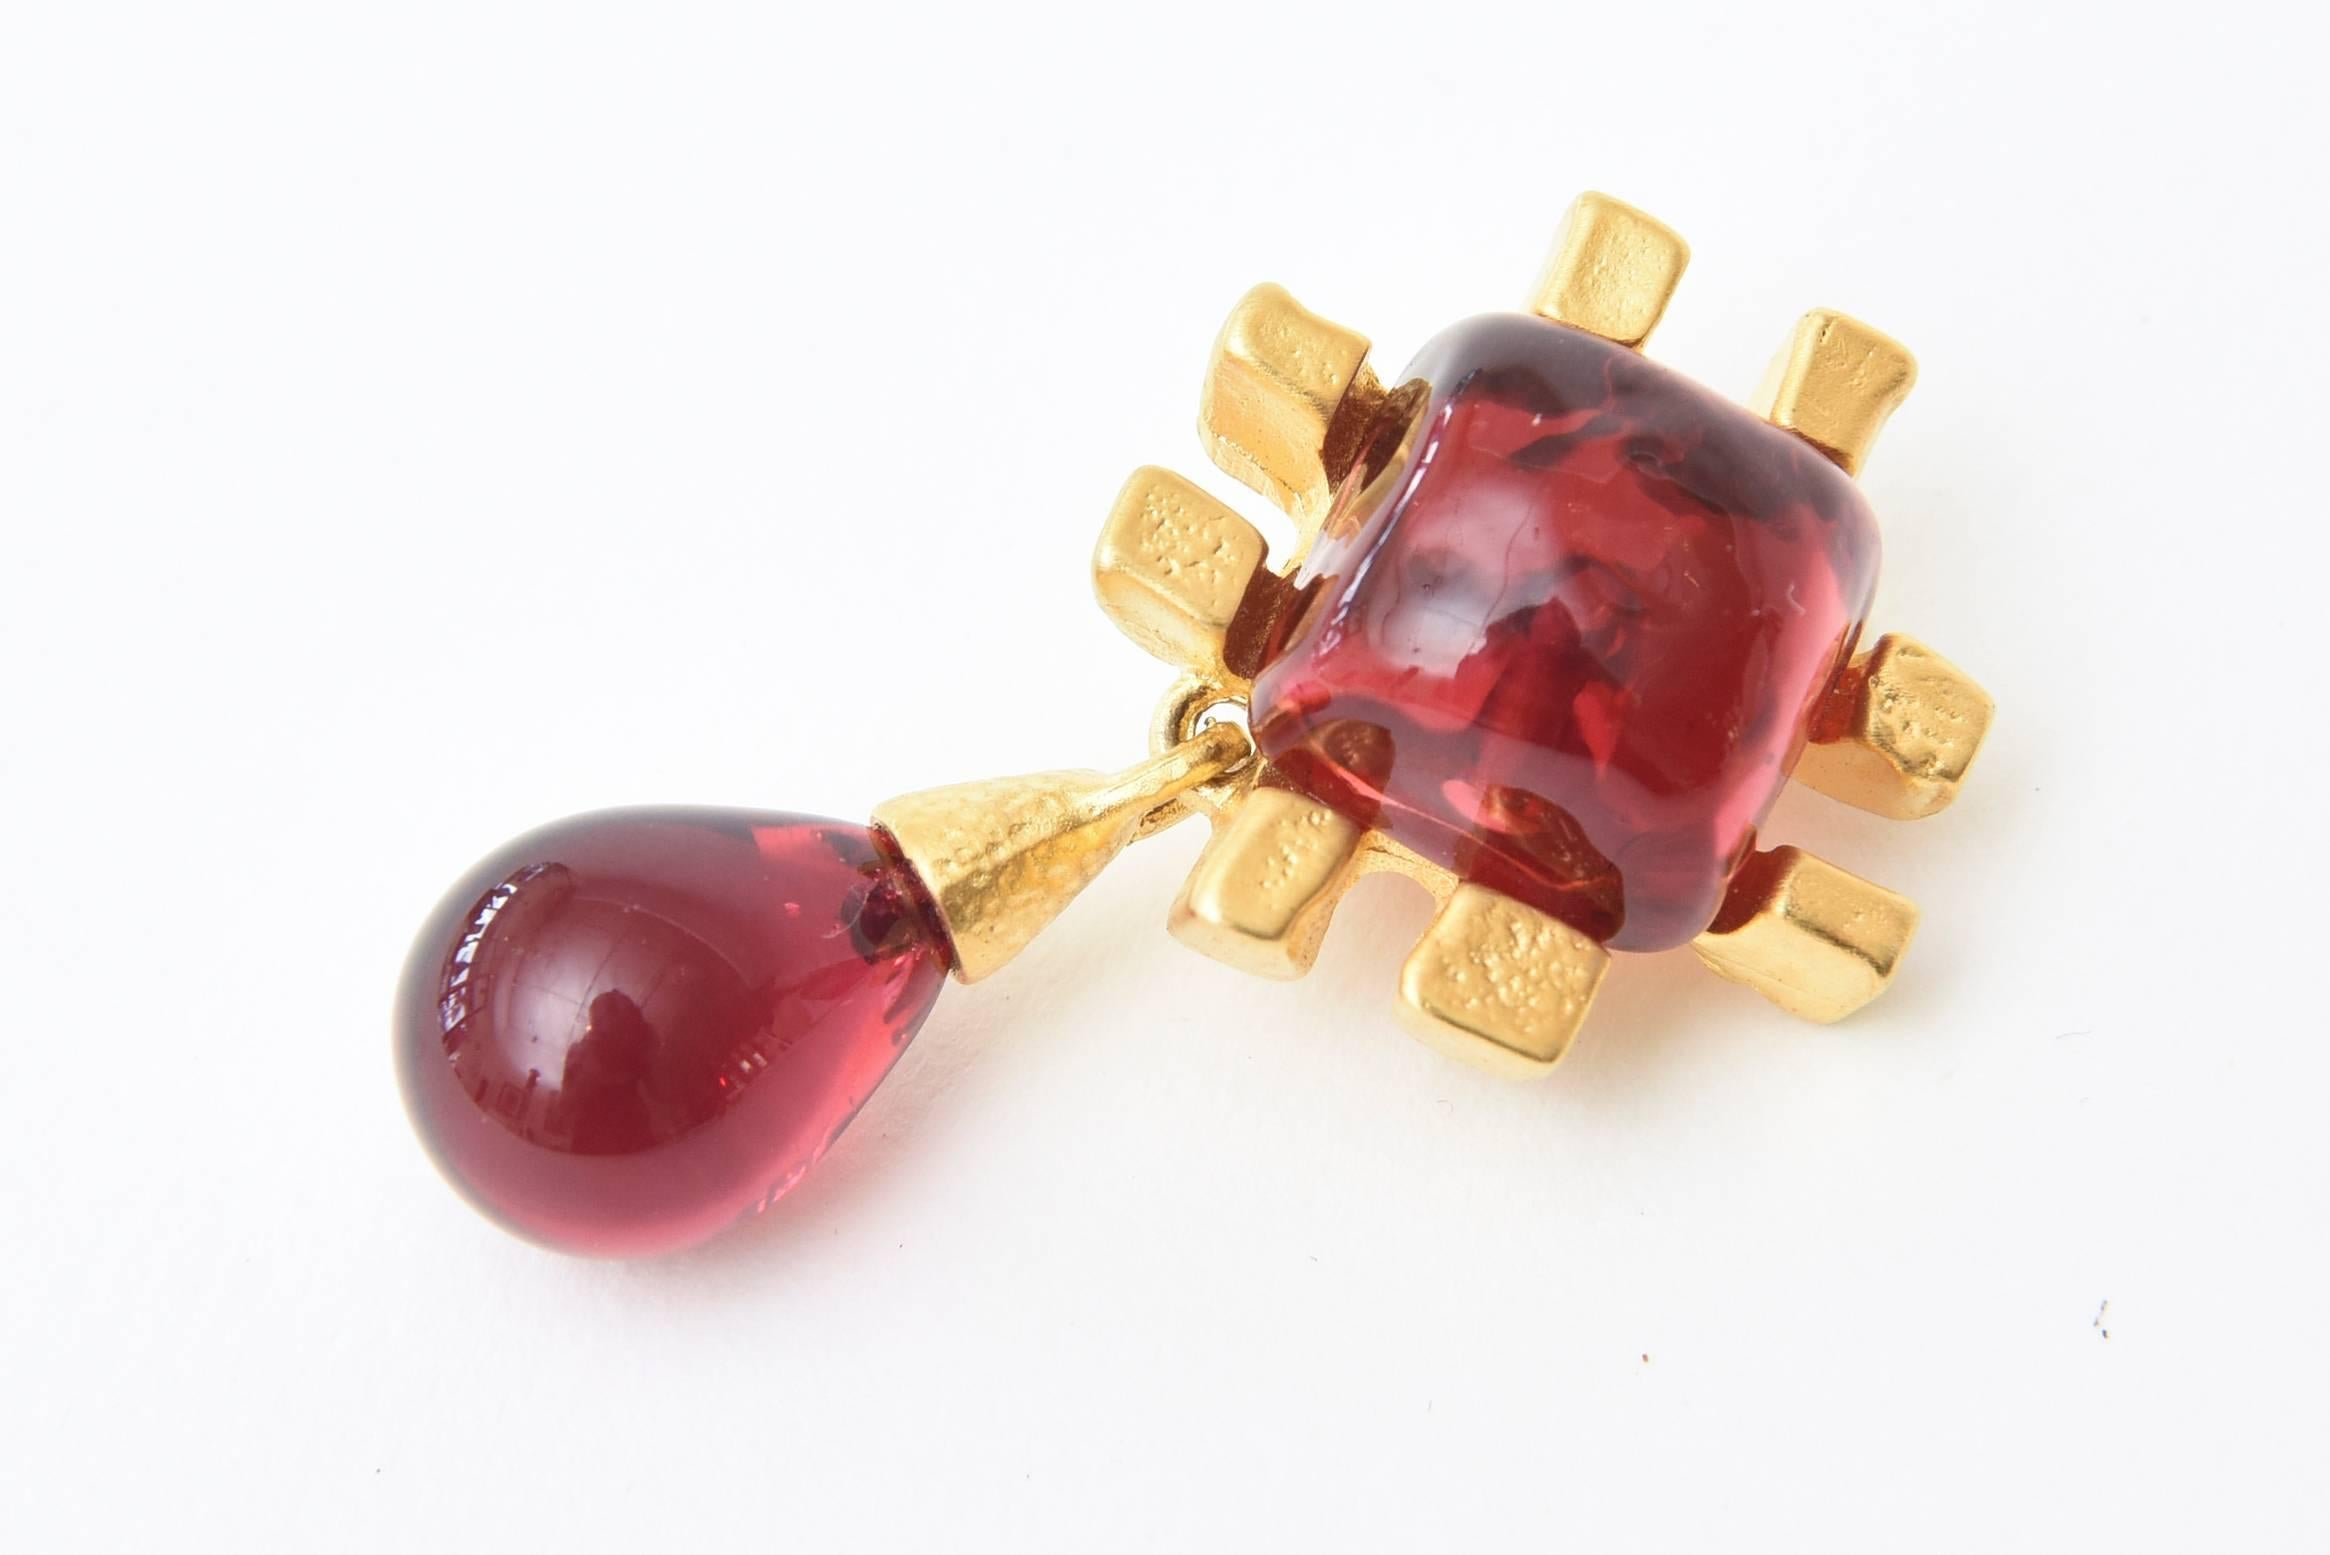 This pair of stunning vintage clip on earrings are by the jewelry artist Andrew Springarn. It is done in the manner of the house of Gripoix. They are poured red glass, modernist in form and sculptural in design. The earrings are one of a kind and